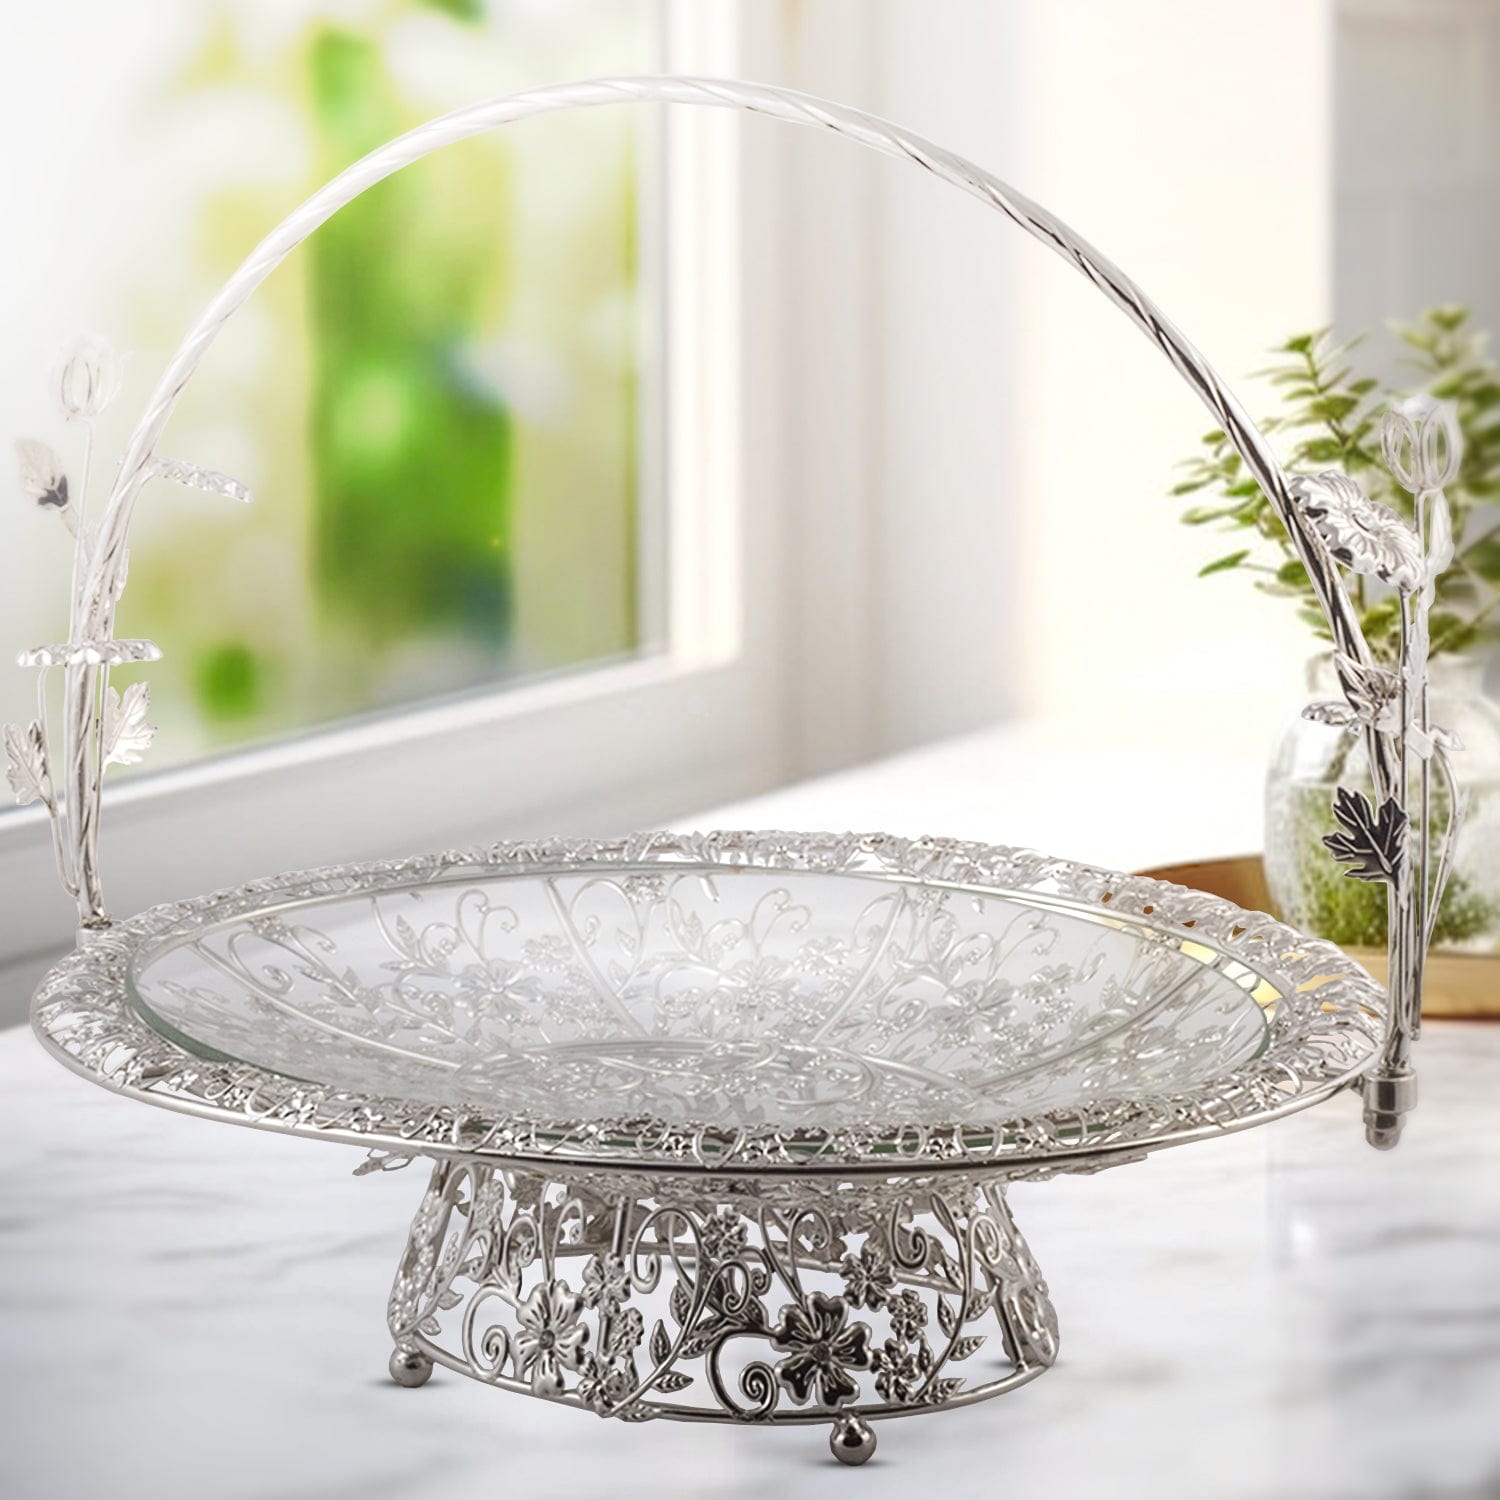 Red Butler dining_decor Silver Oval Tray SWOT0SG18Y18A1 GSOT18A1 Redbutler